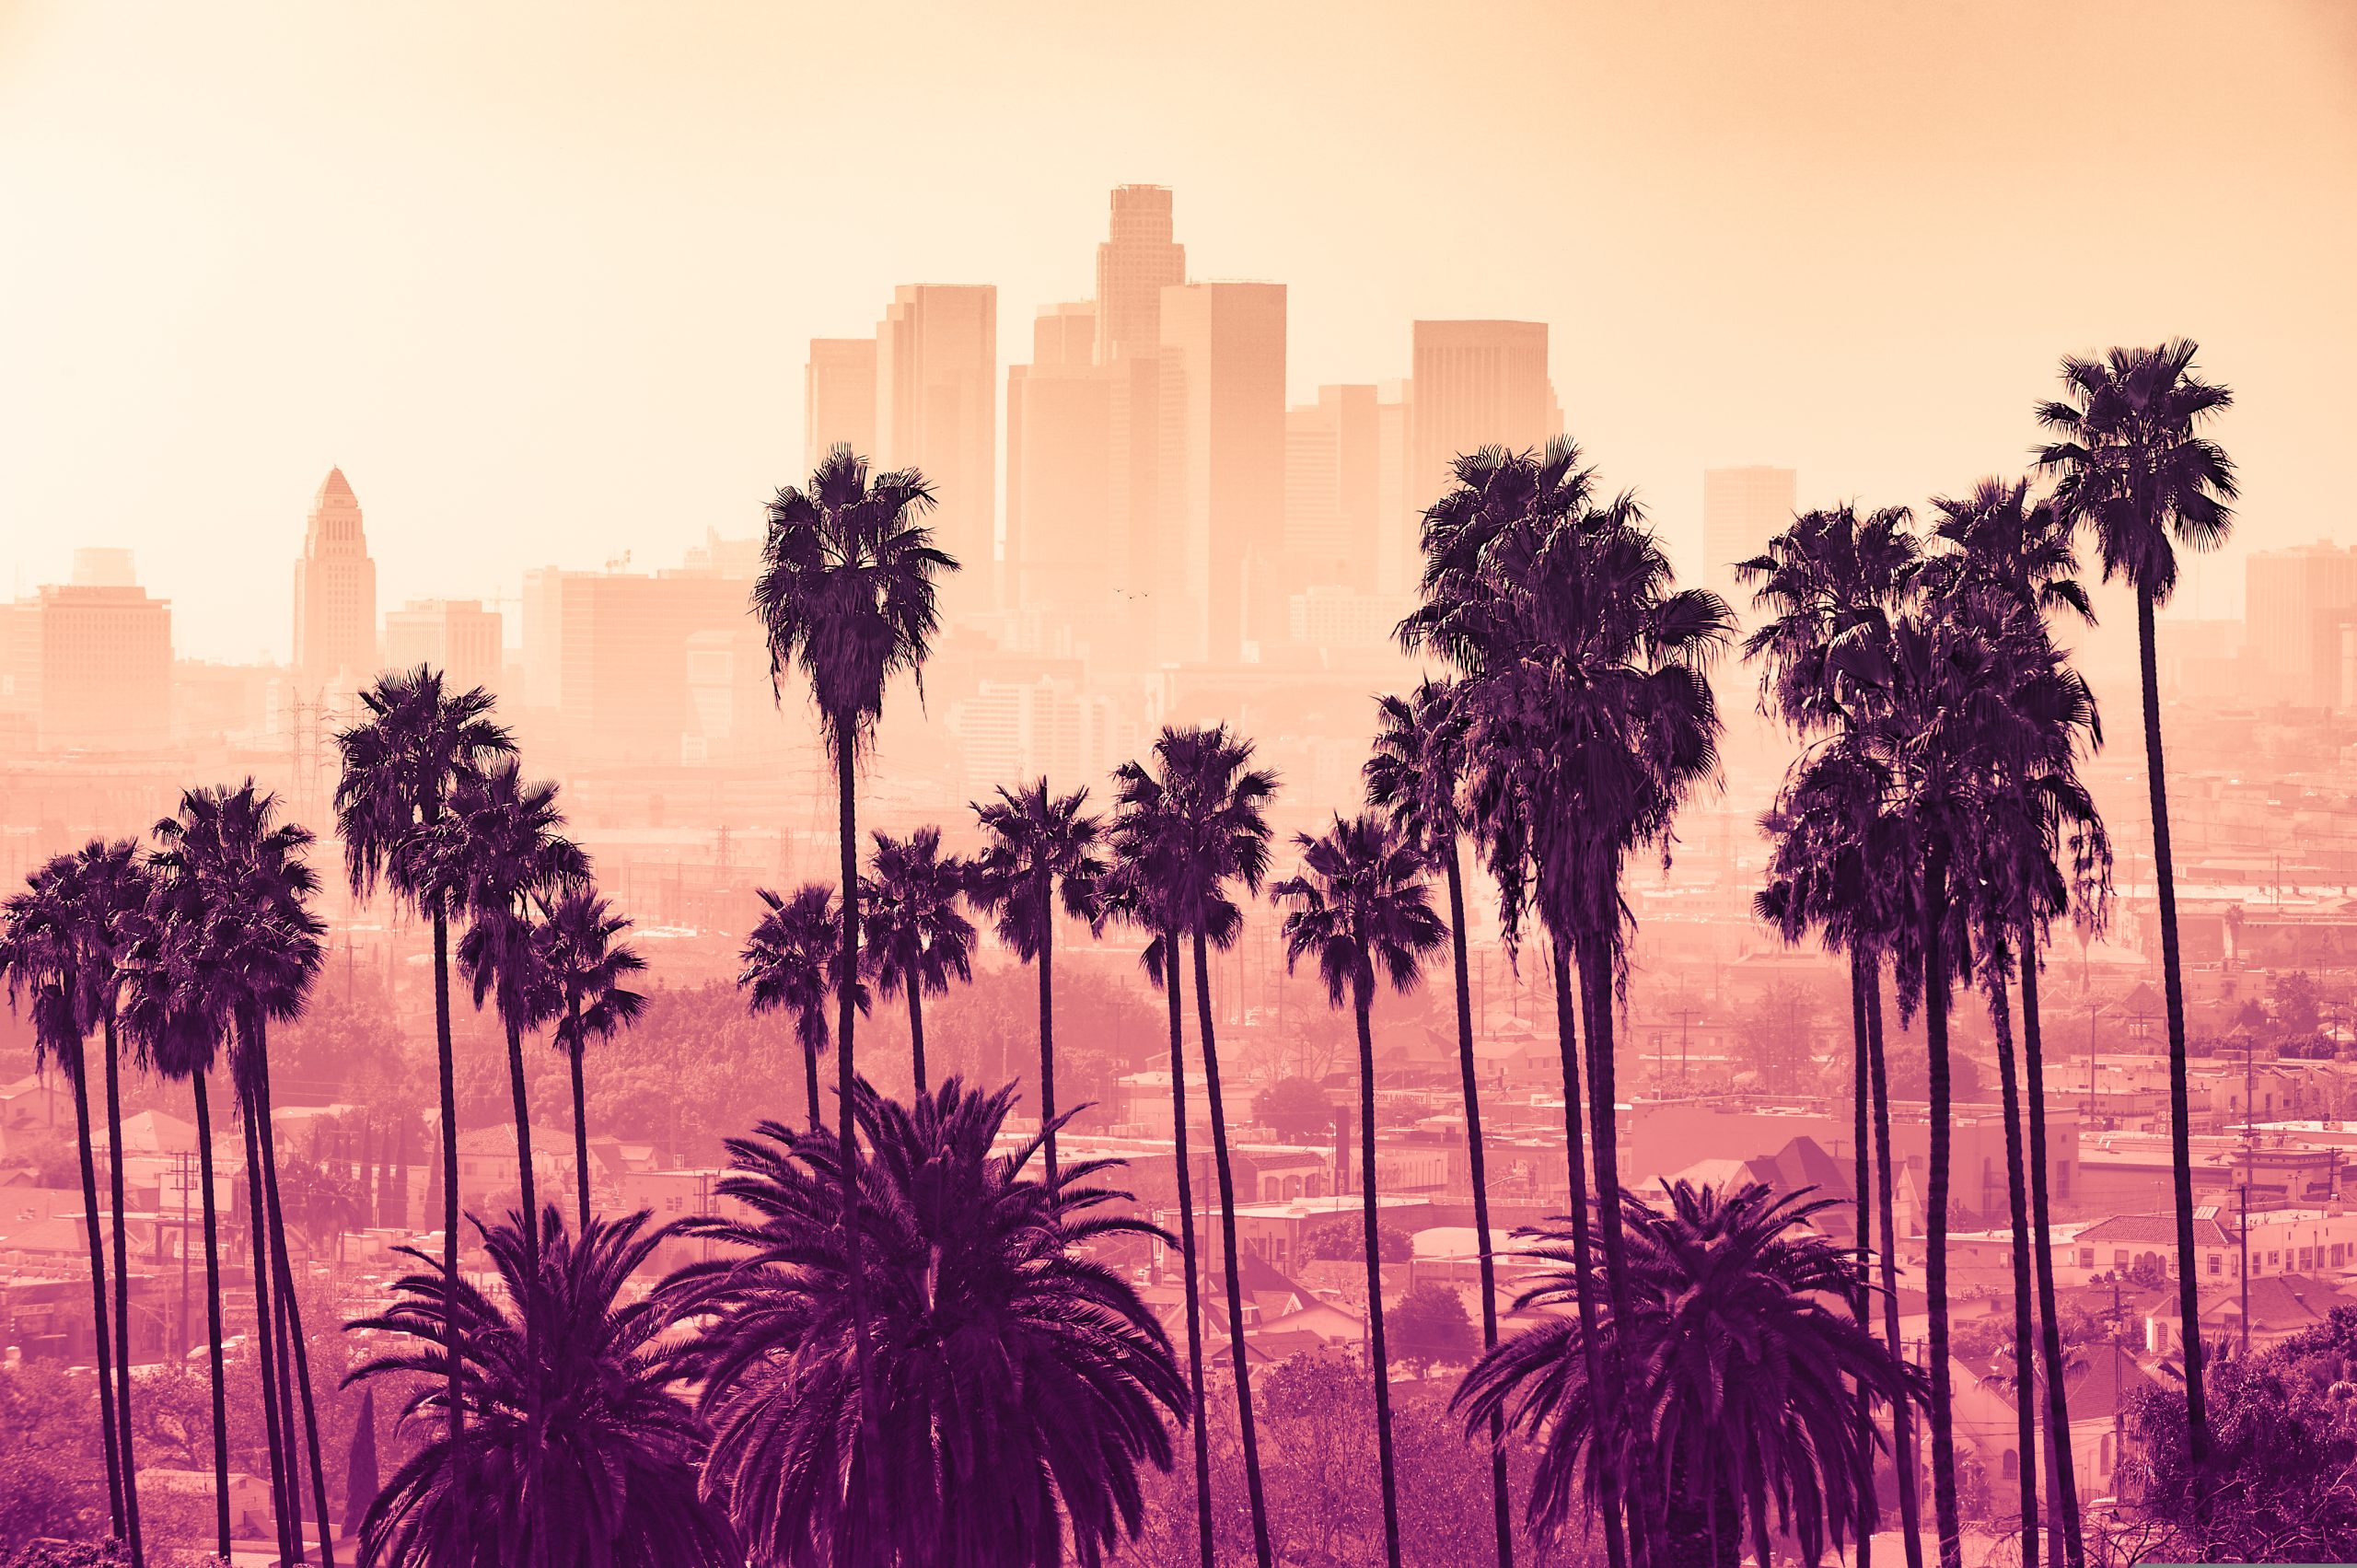 Los,Angeles,Skyline,With,Palm,Trees,In,The,Foreground